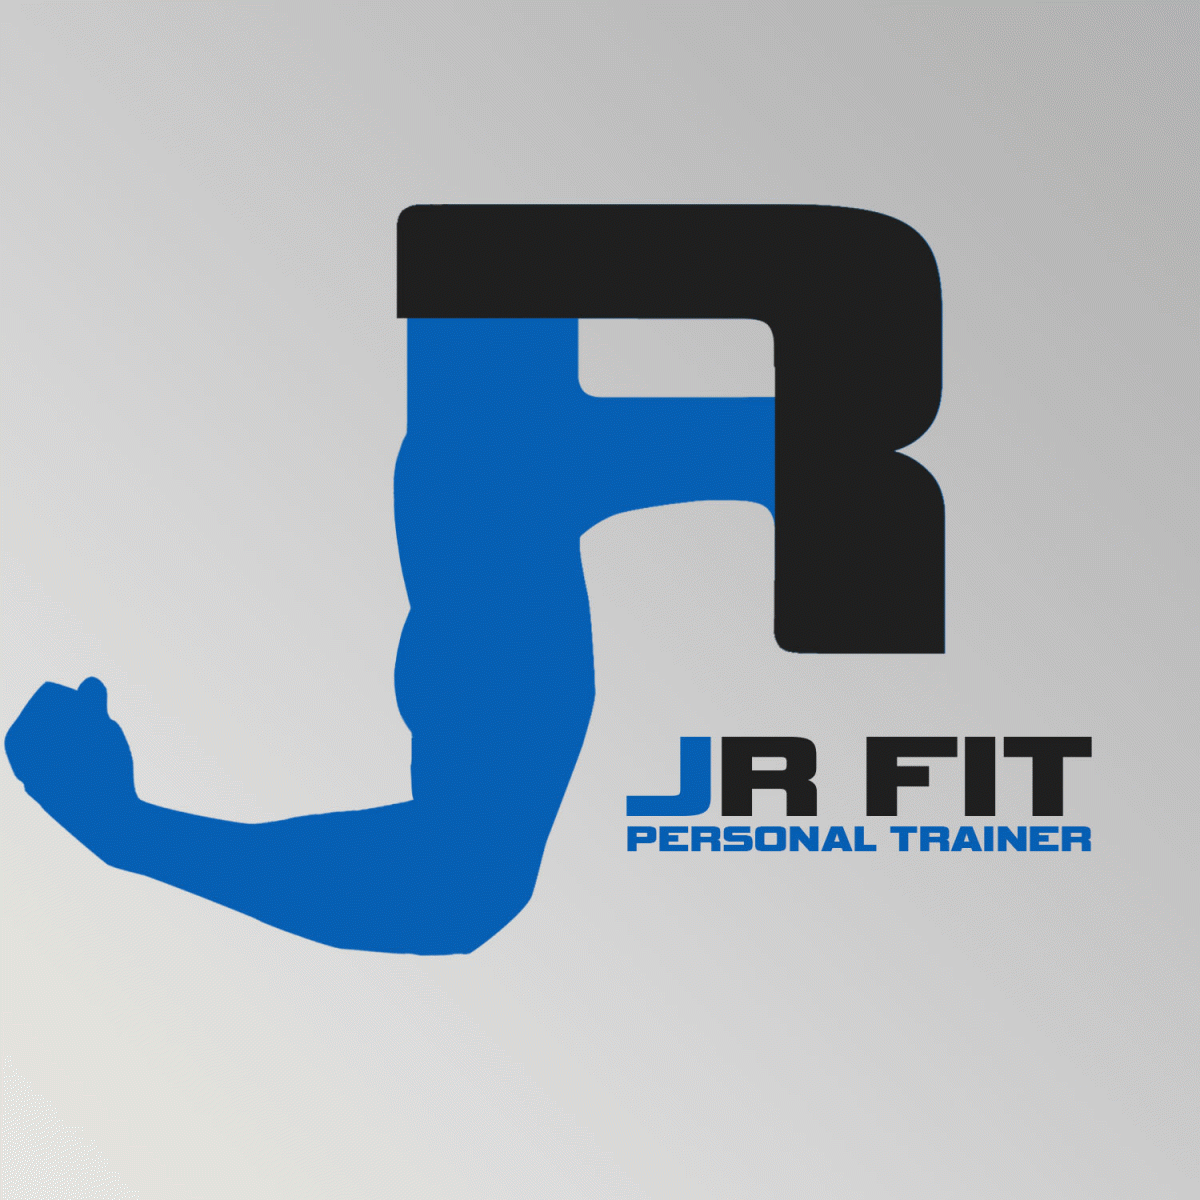 Trainer Logo - JR Fit (Personal Trainer)